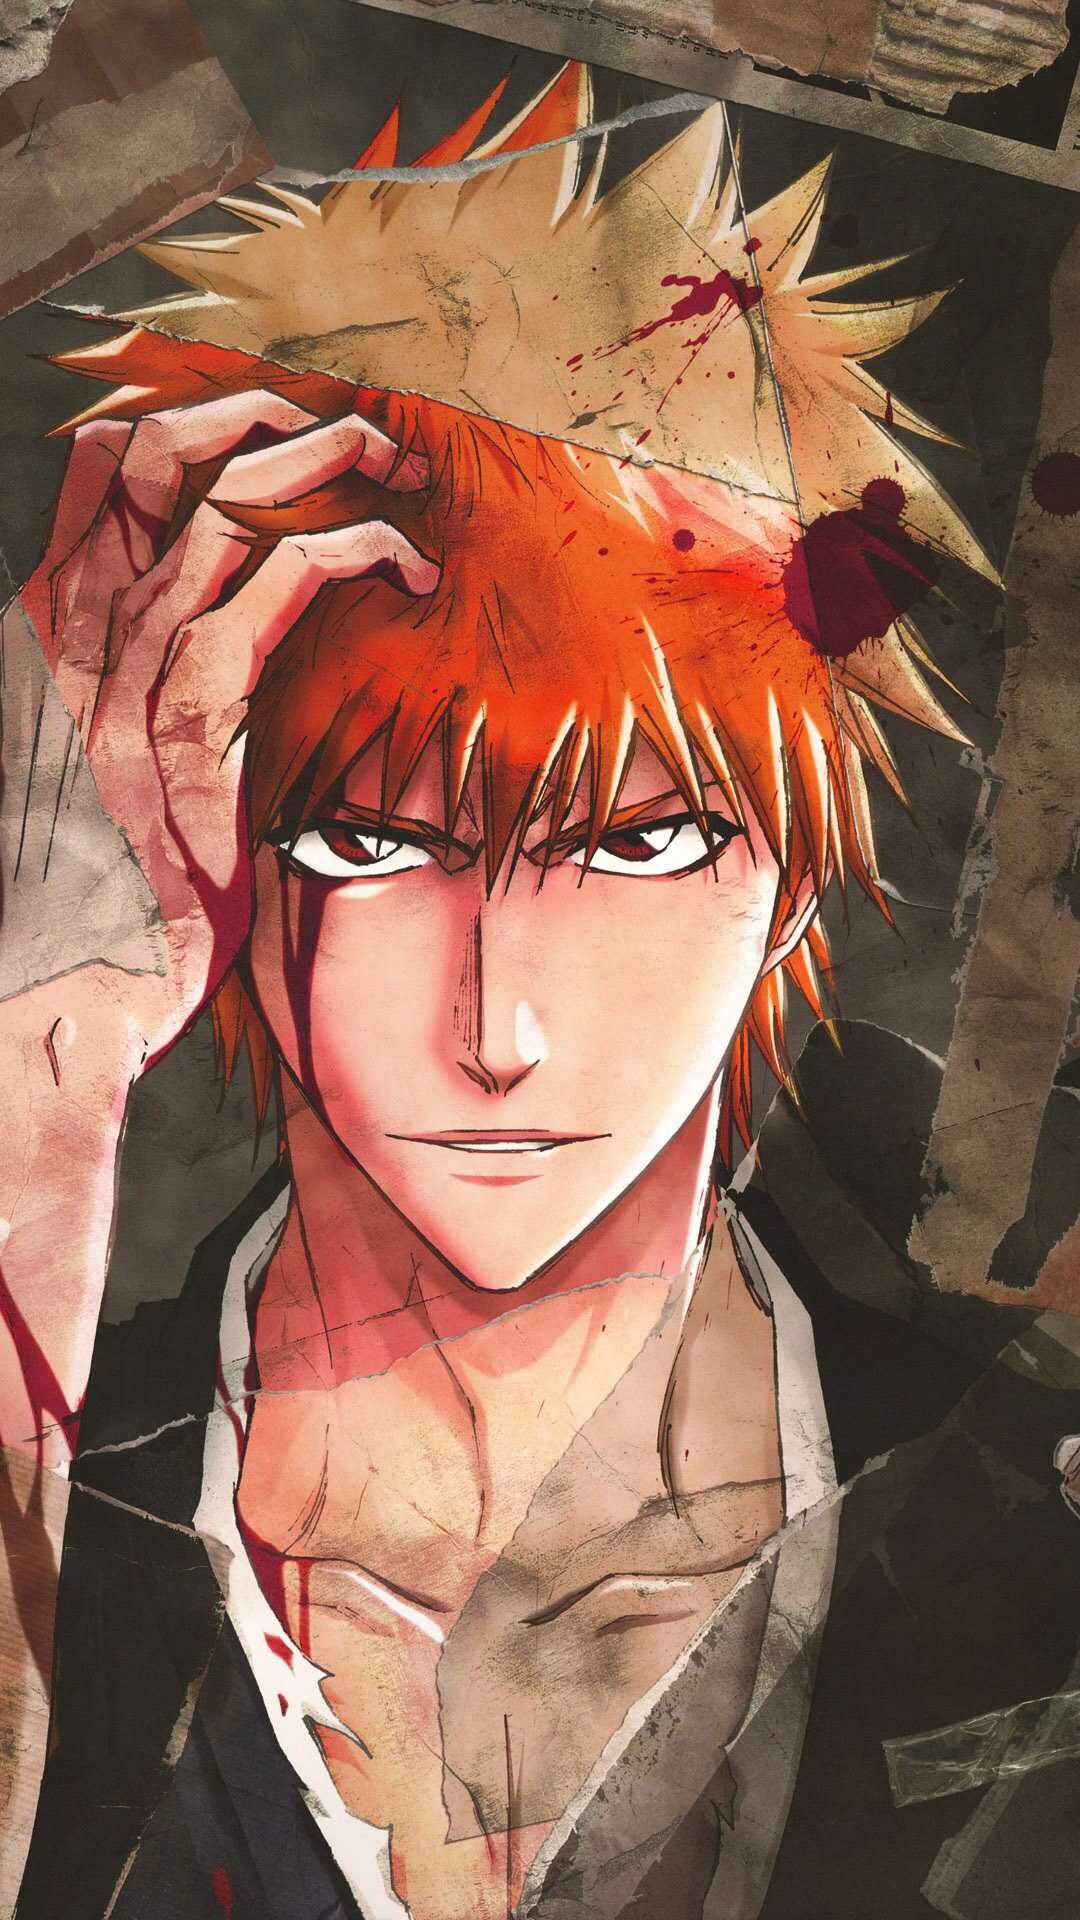 Bleach: Ichigo, becomes a "substitute Soul Reaper" after unintentionally absorbing most of Rukia Kuchiki's powers. 1080x1920 Full HD Wallpaper.